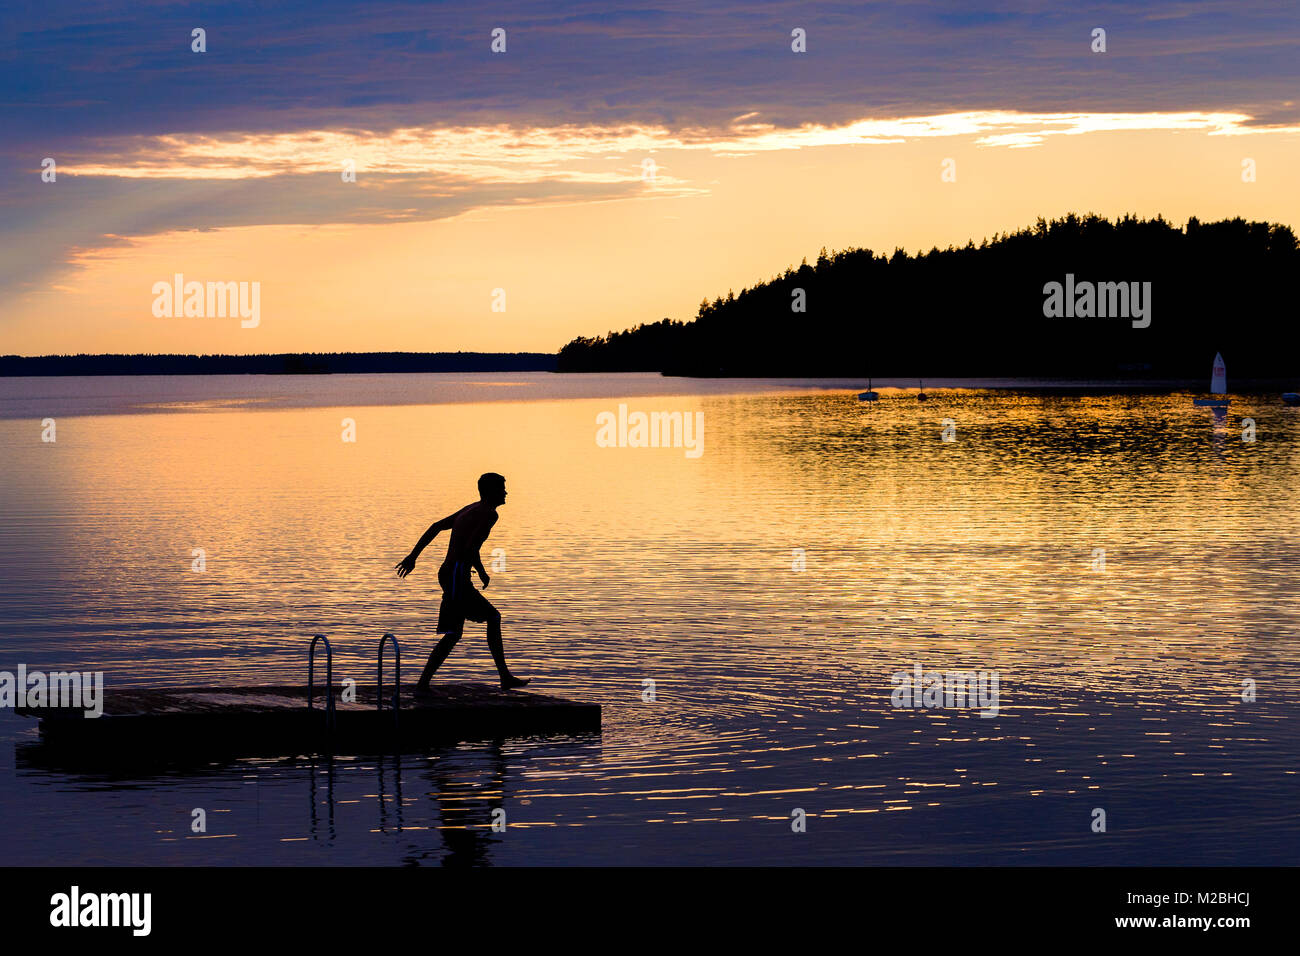 Silhouette of young man jumping from a pontoon into lake at sunset Stock Photo